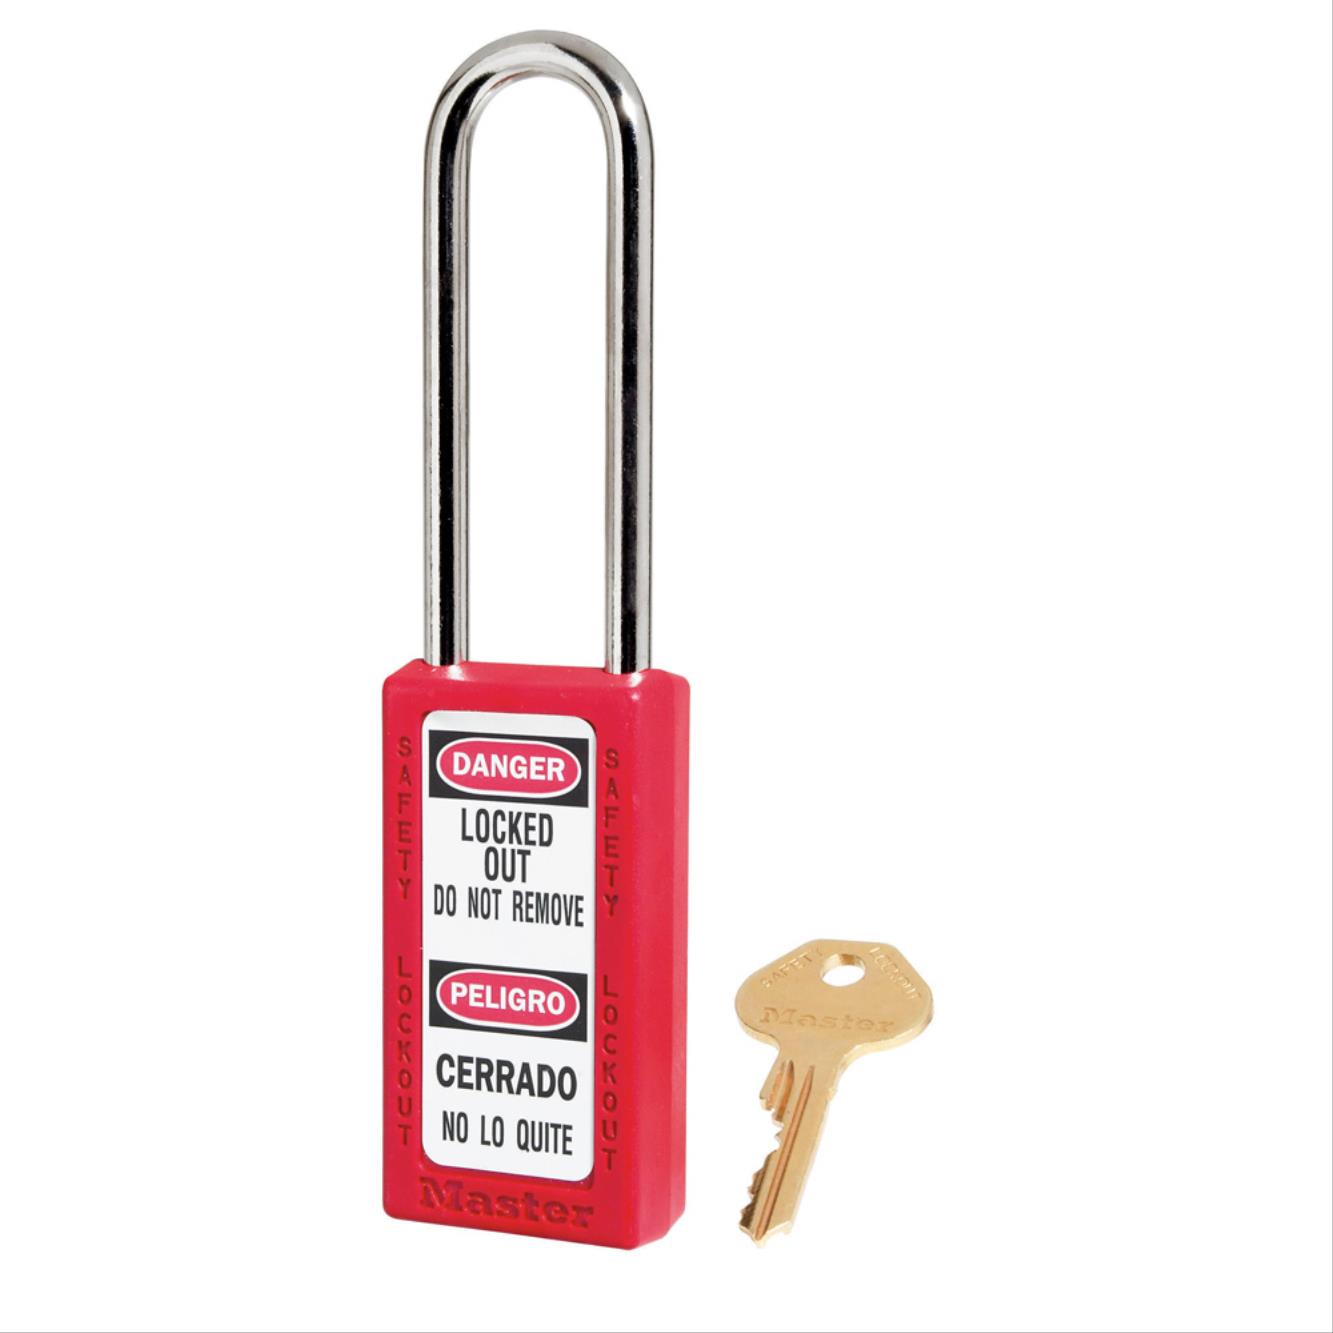 Aluminum Zenex™ Thermoplastic Lockouts, 411 series, 1.5" Wide Body and 1.5" or 3" Long Shackle